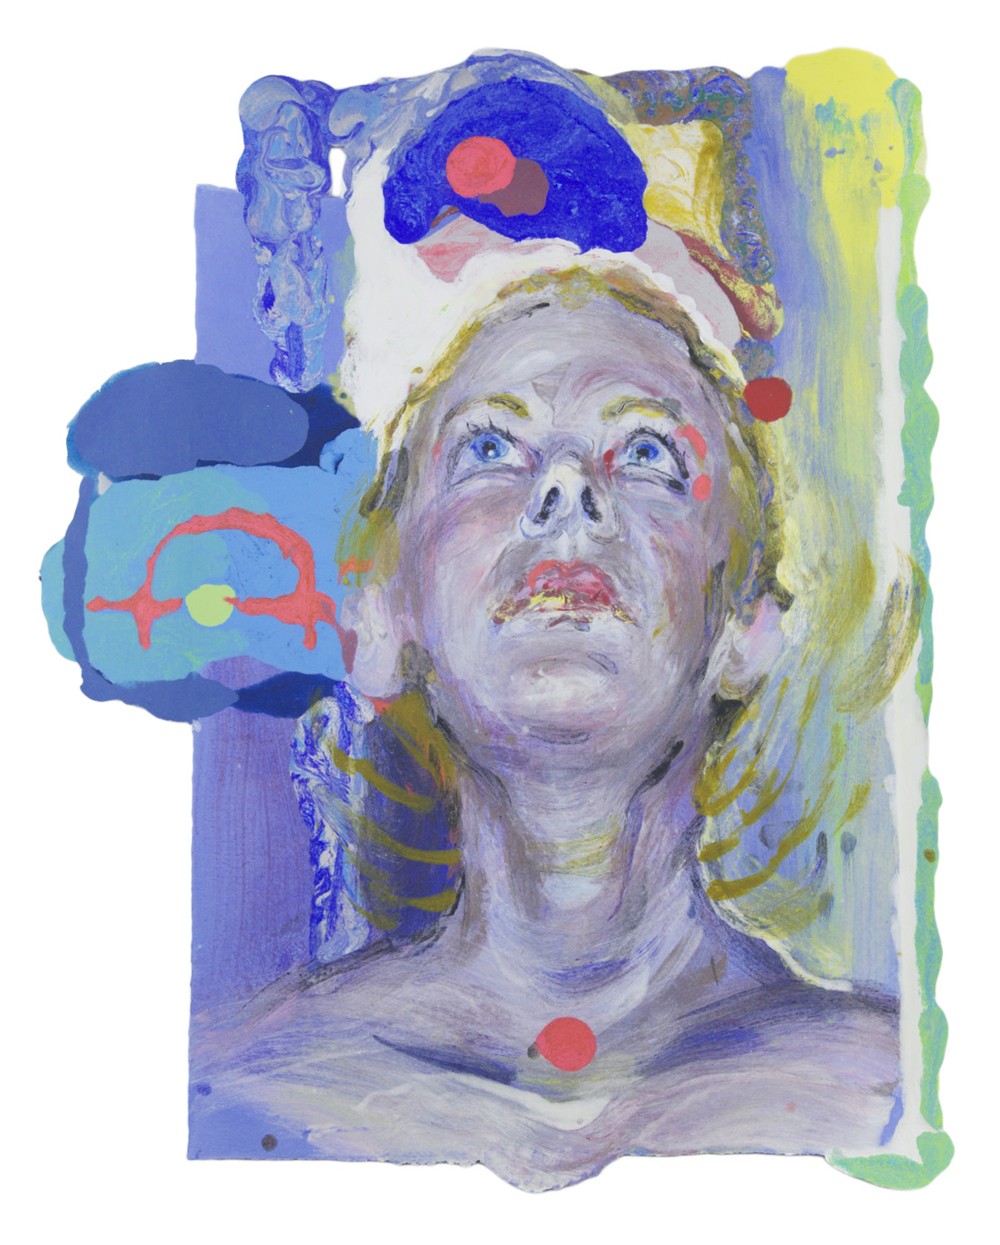 A painting of a face looking up